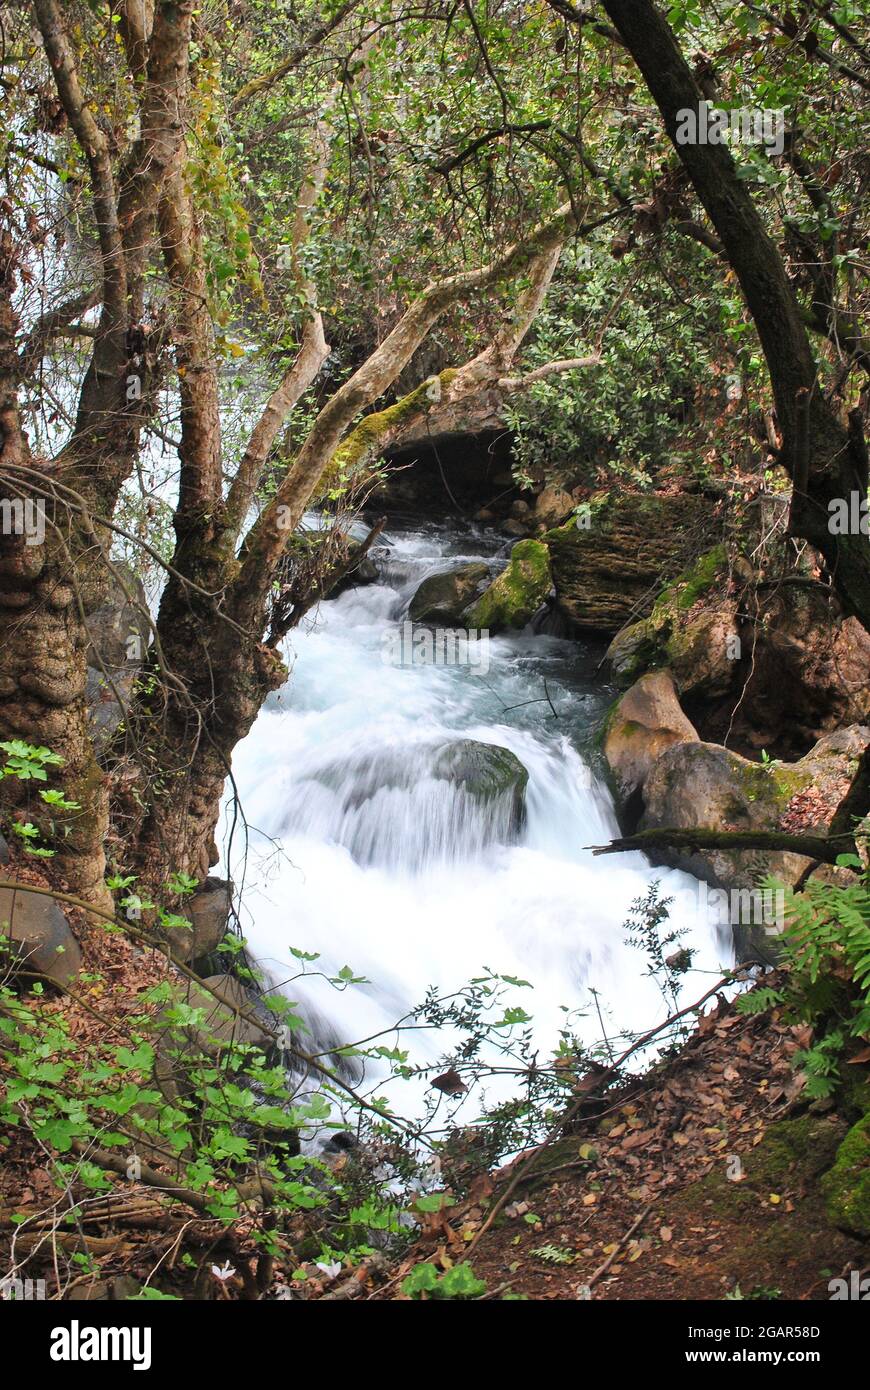 Nahal Hermon Nature Reserve (Banyas) - strong rushing water of the Banyas stream flowing among moss-covered stones; Golan Heights, Northern Israel Stock Photo